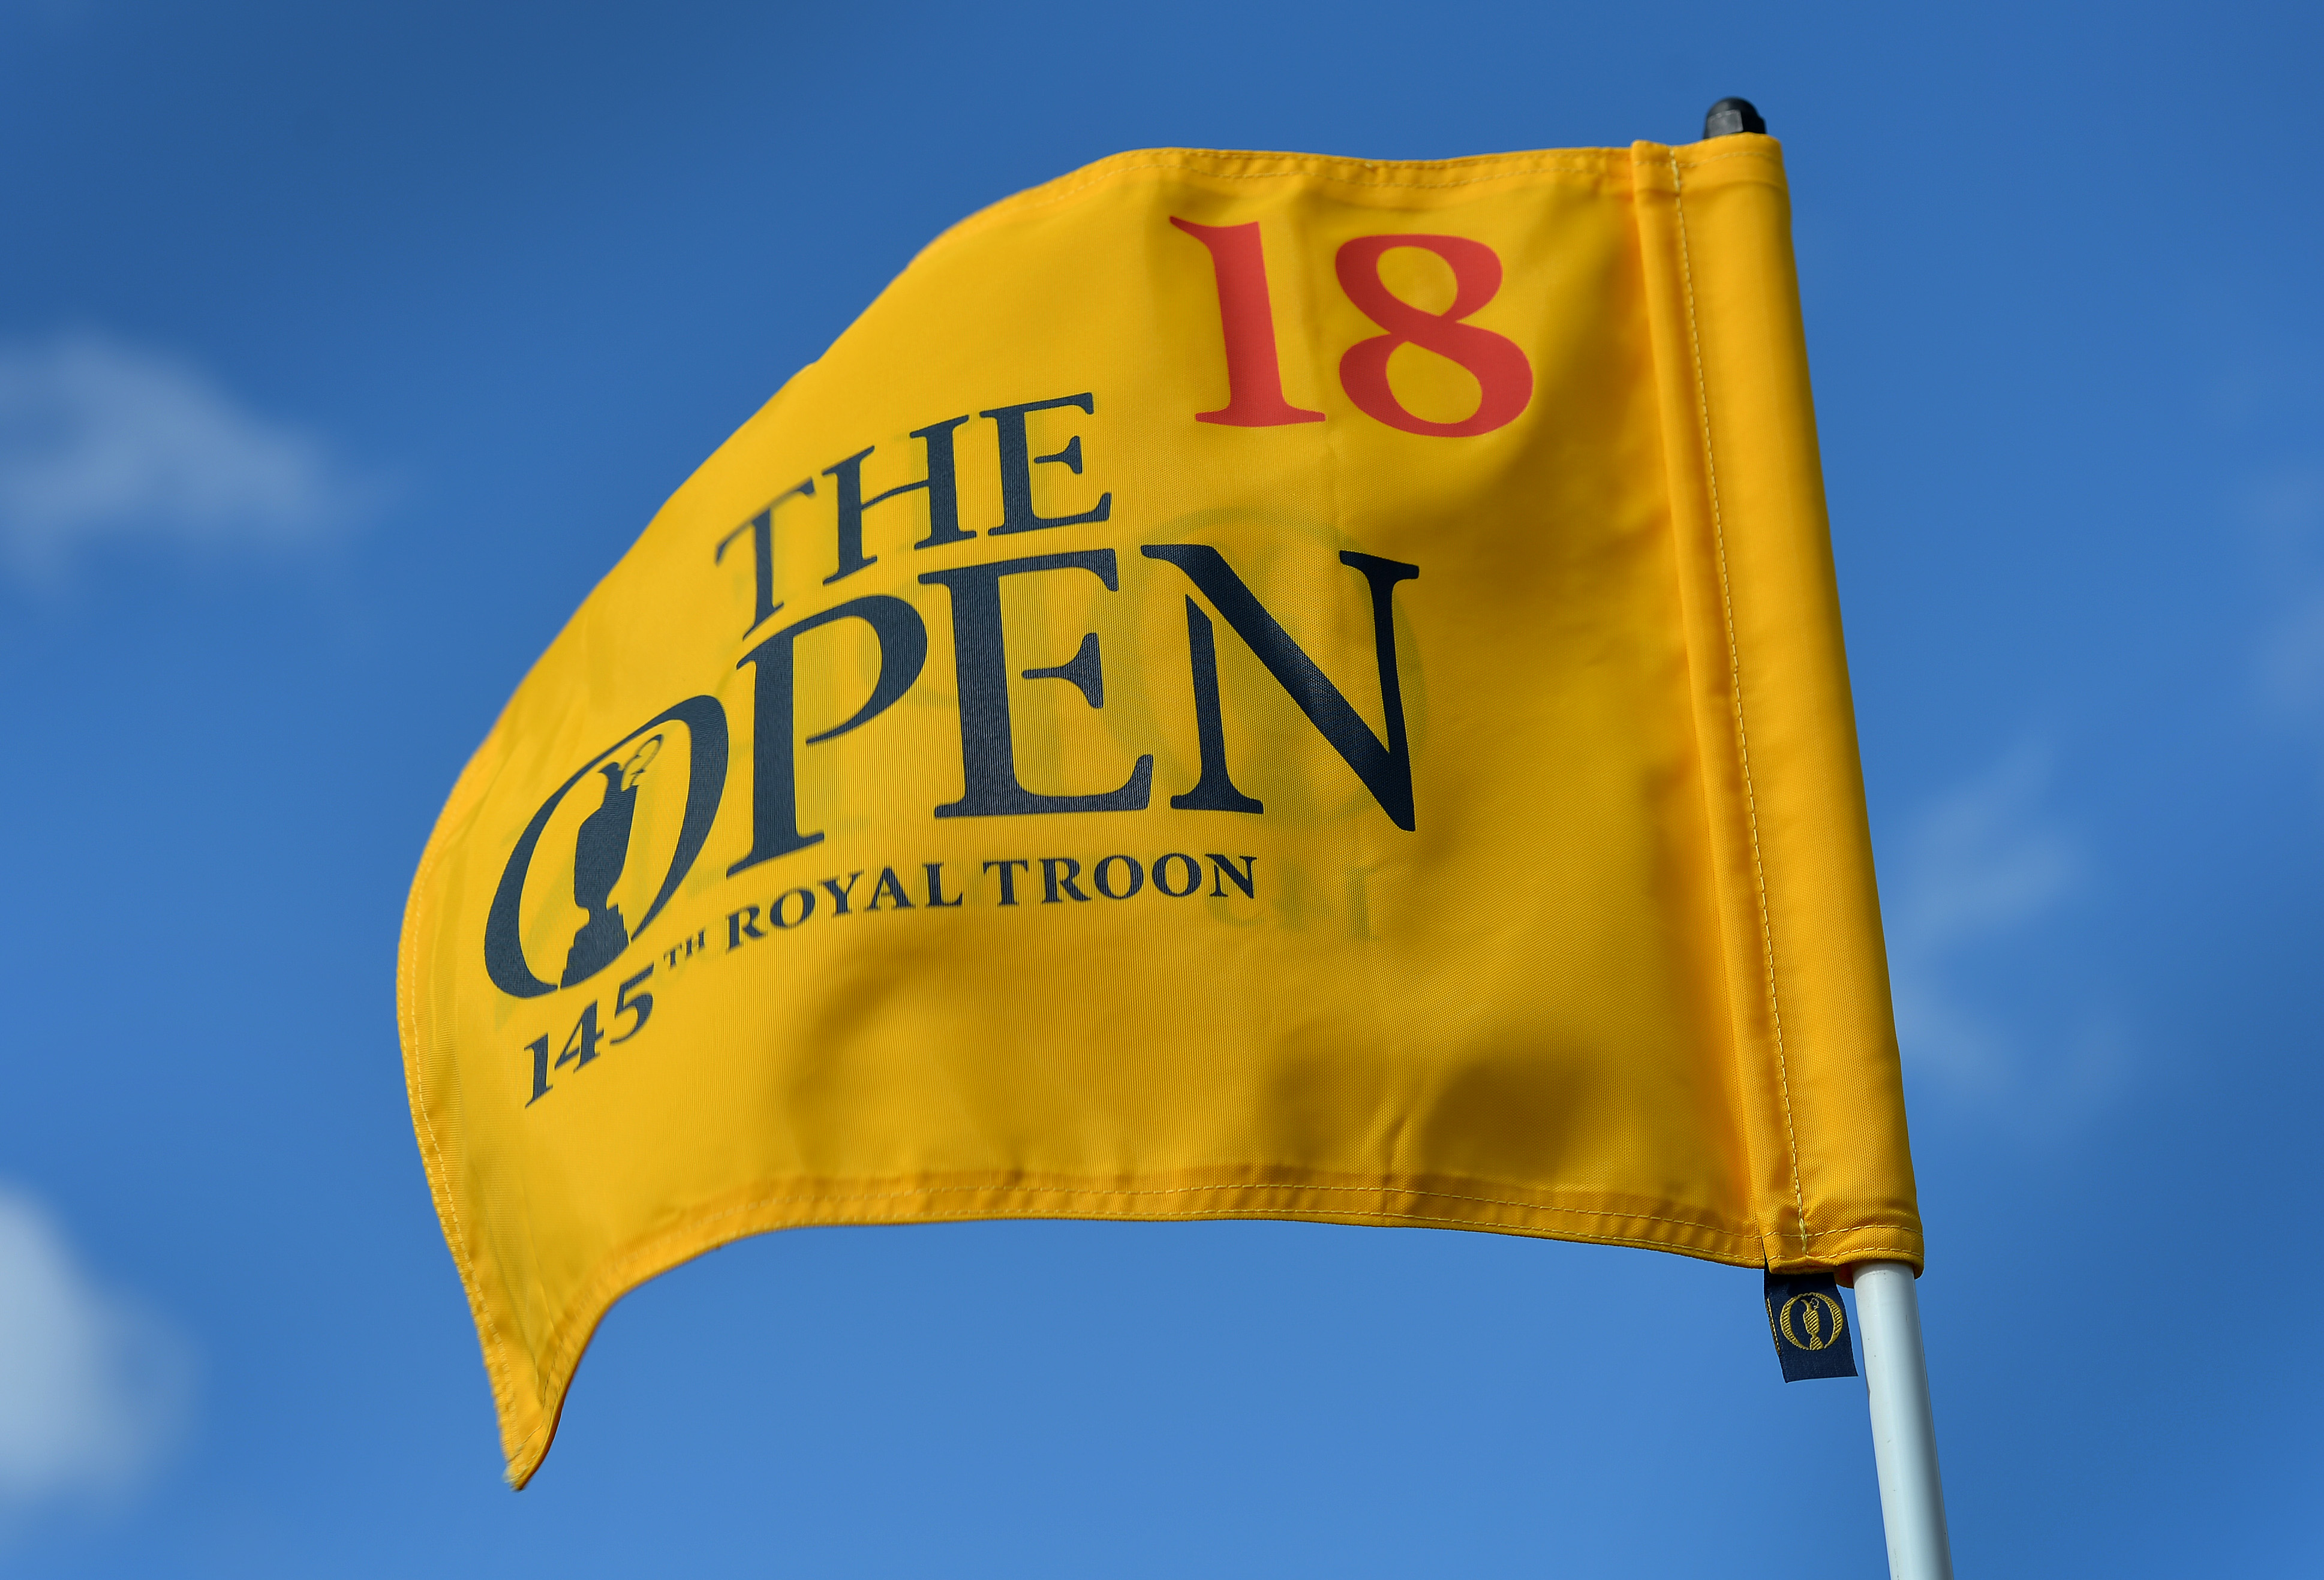 The 18th pin flag at Royal Troon Golf Club during the Open Championship Media Day in Troon, Scotland, on April 26, 2016. (Mark Runnacles—Getty Images)